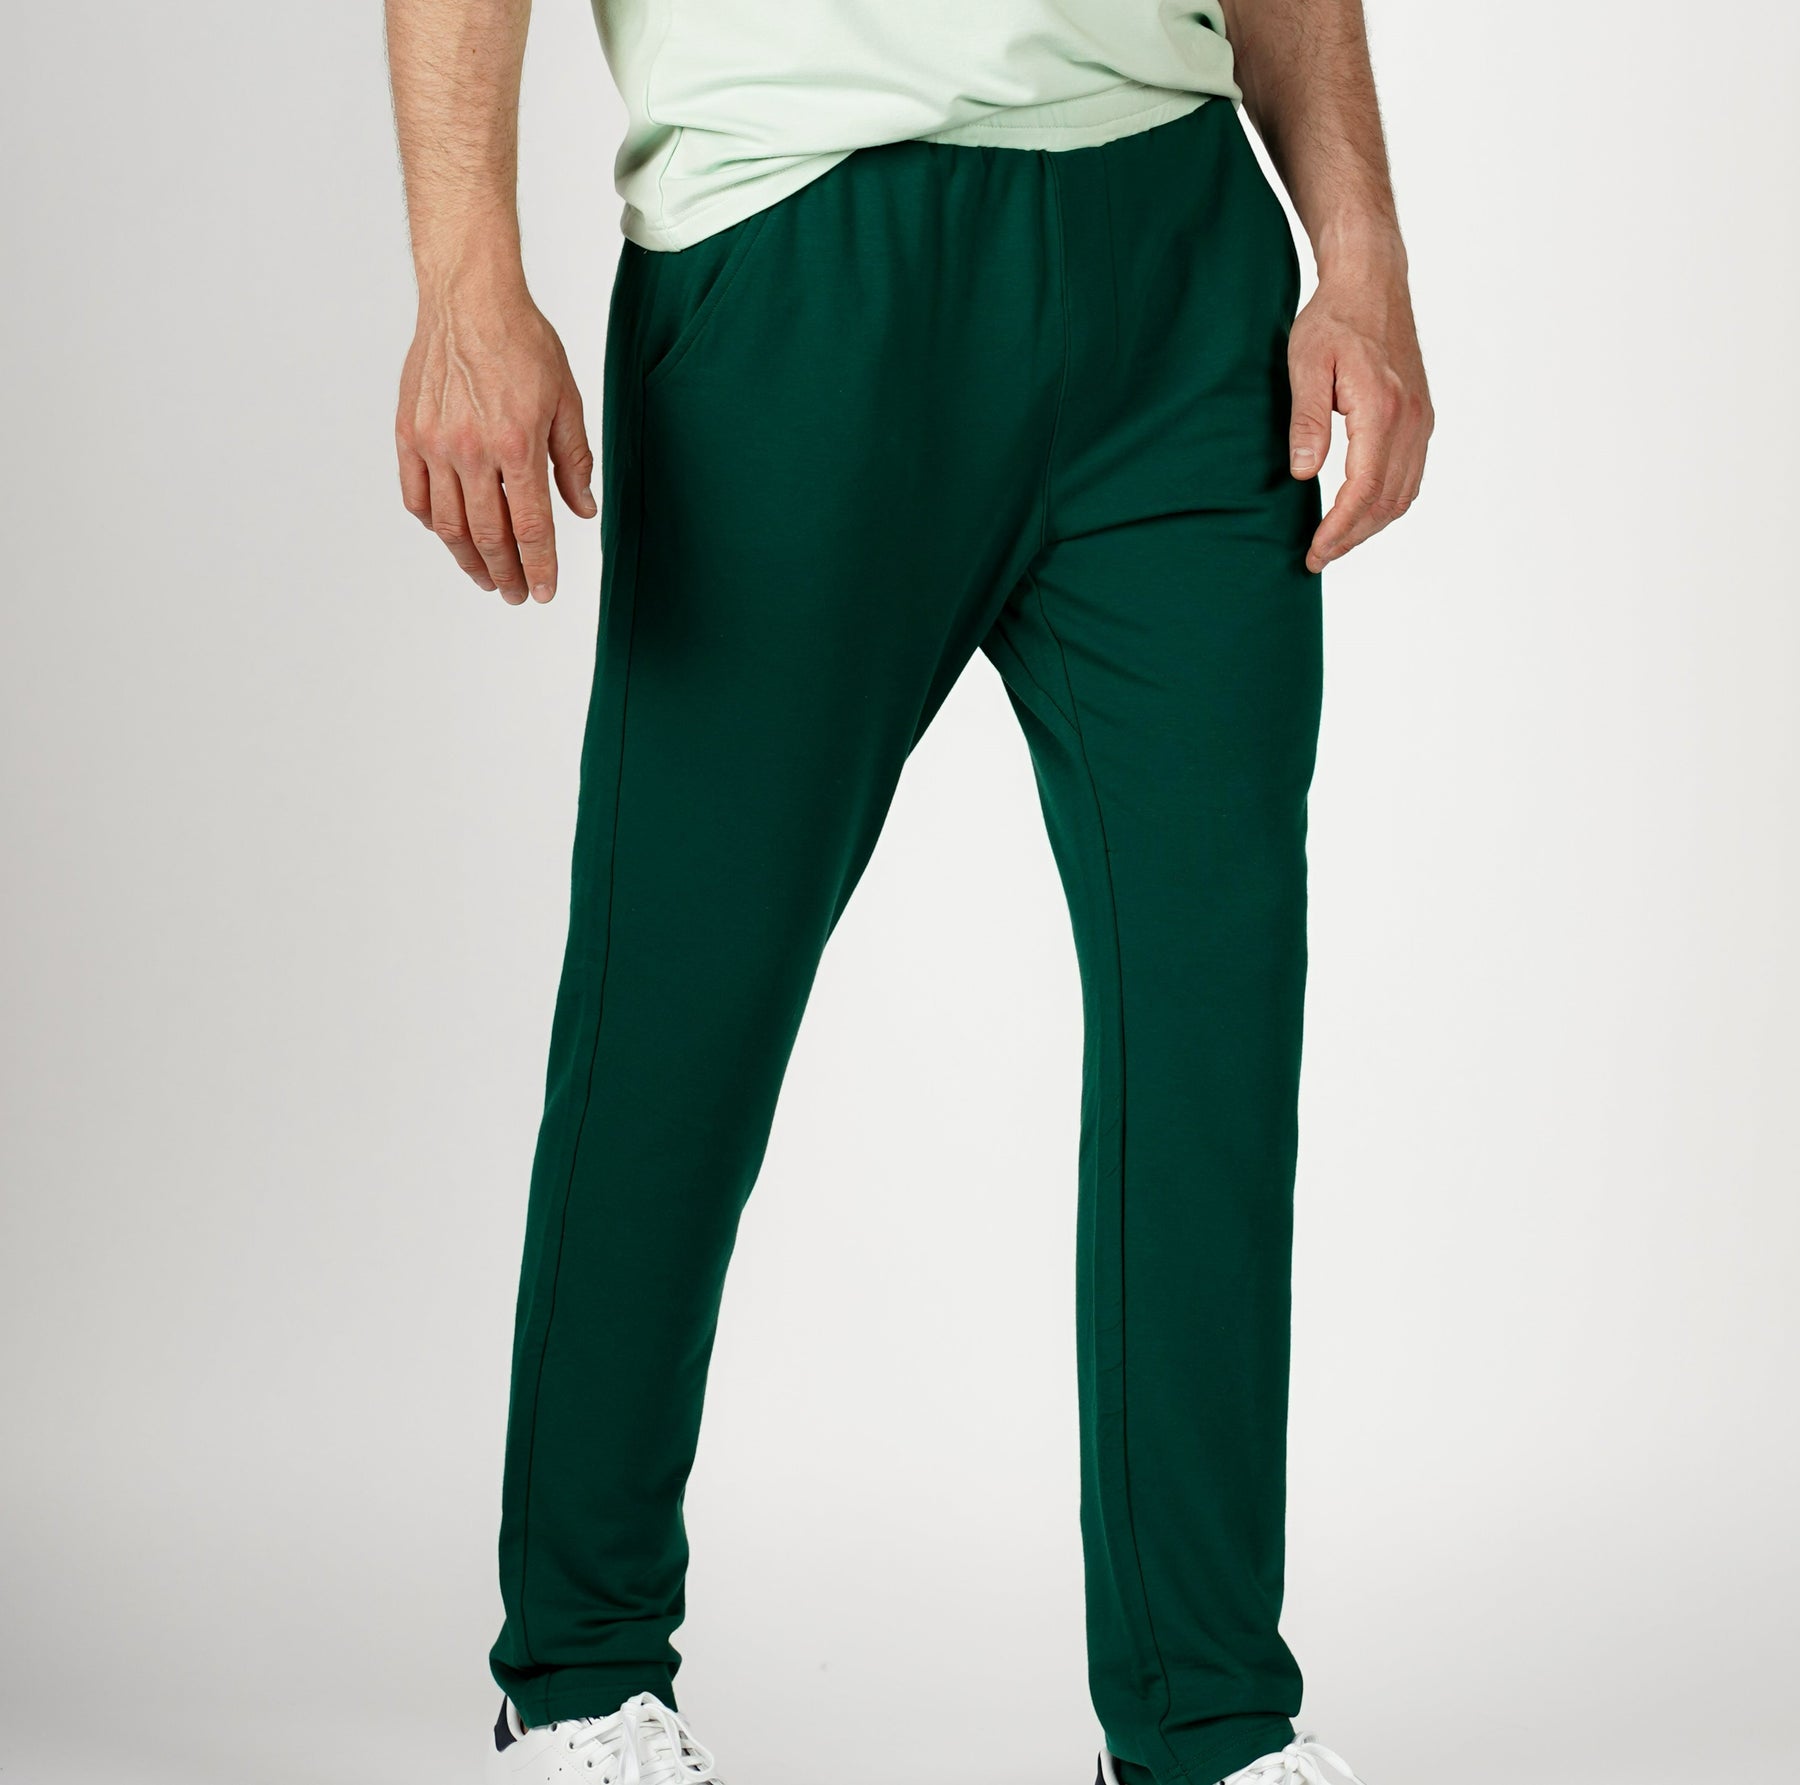 [Clearance] Colorblock Bamboo Pants